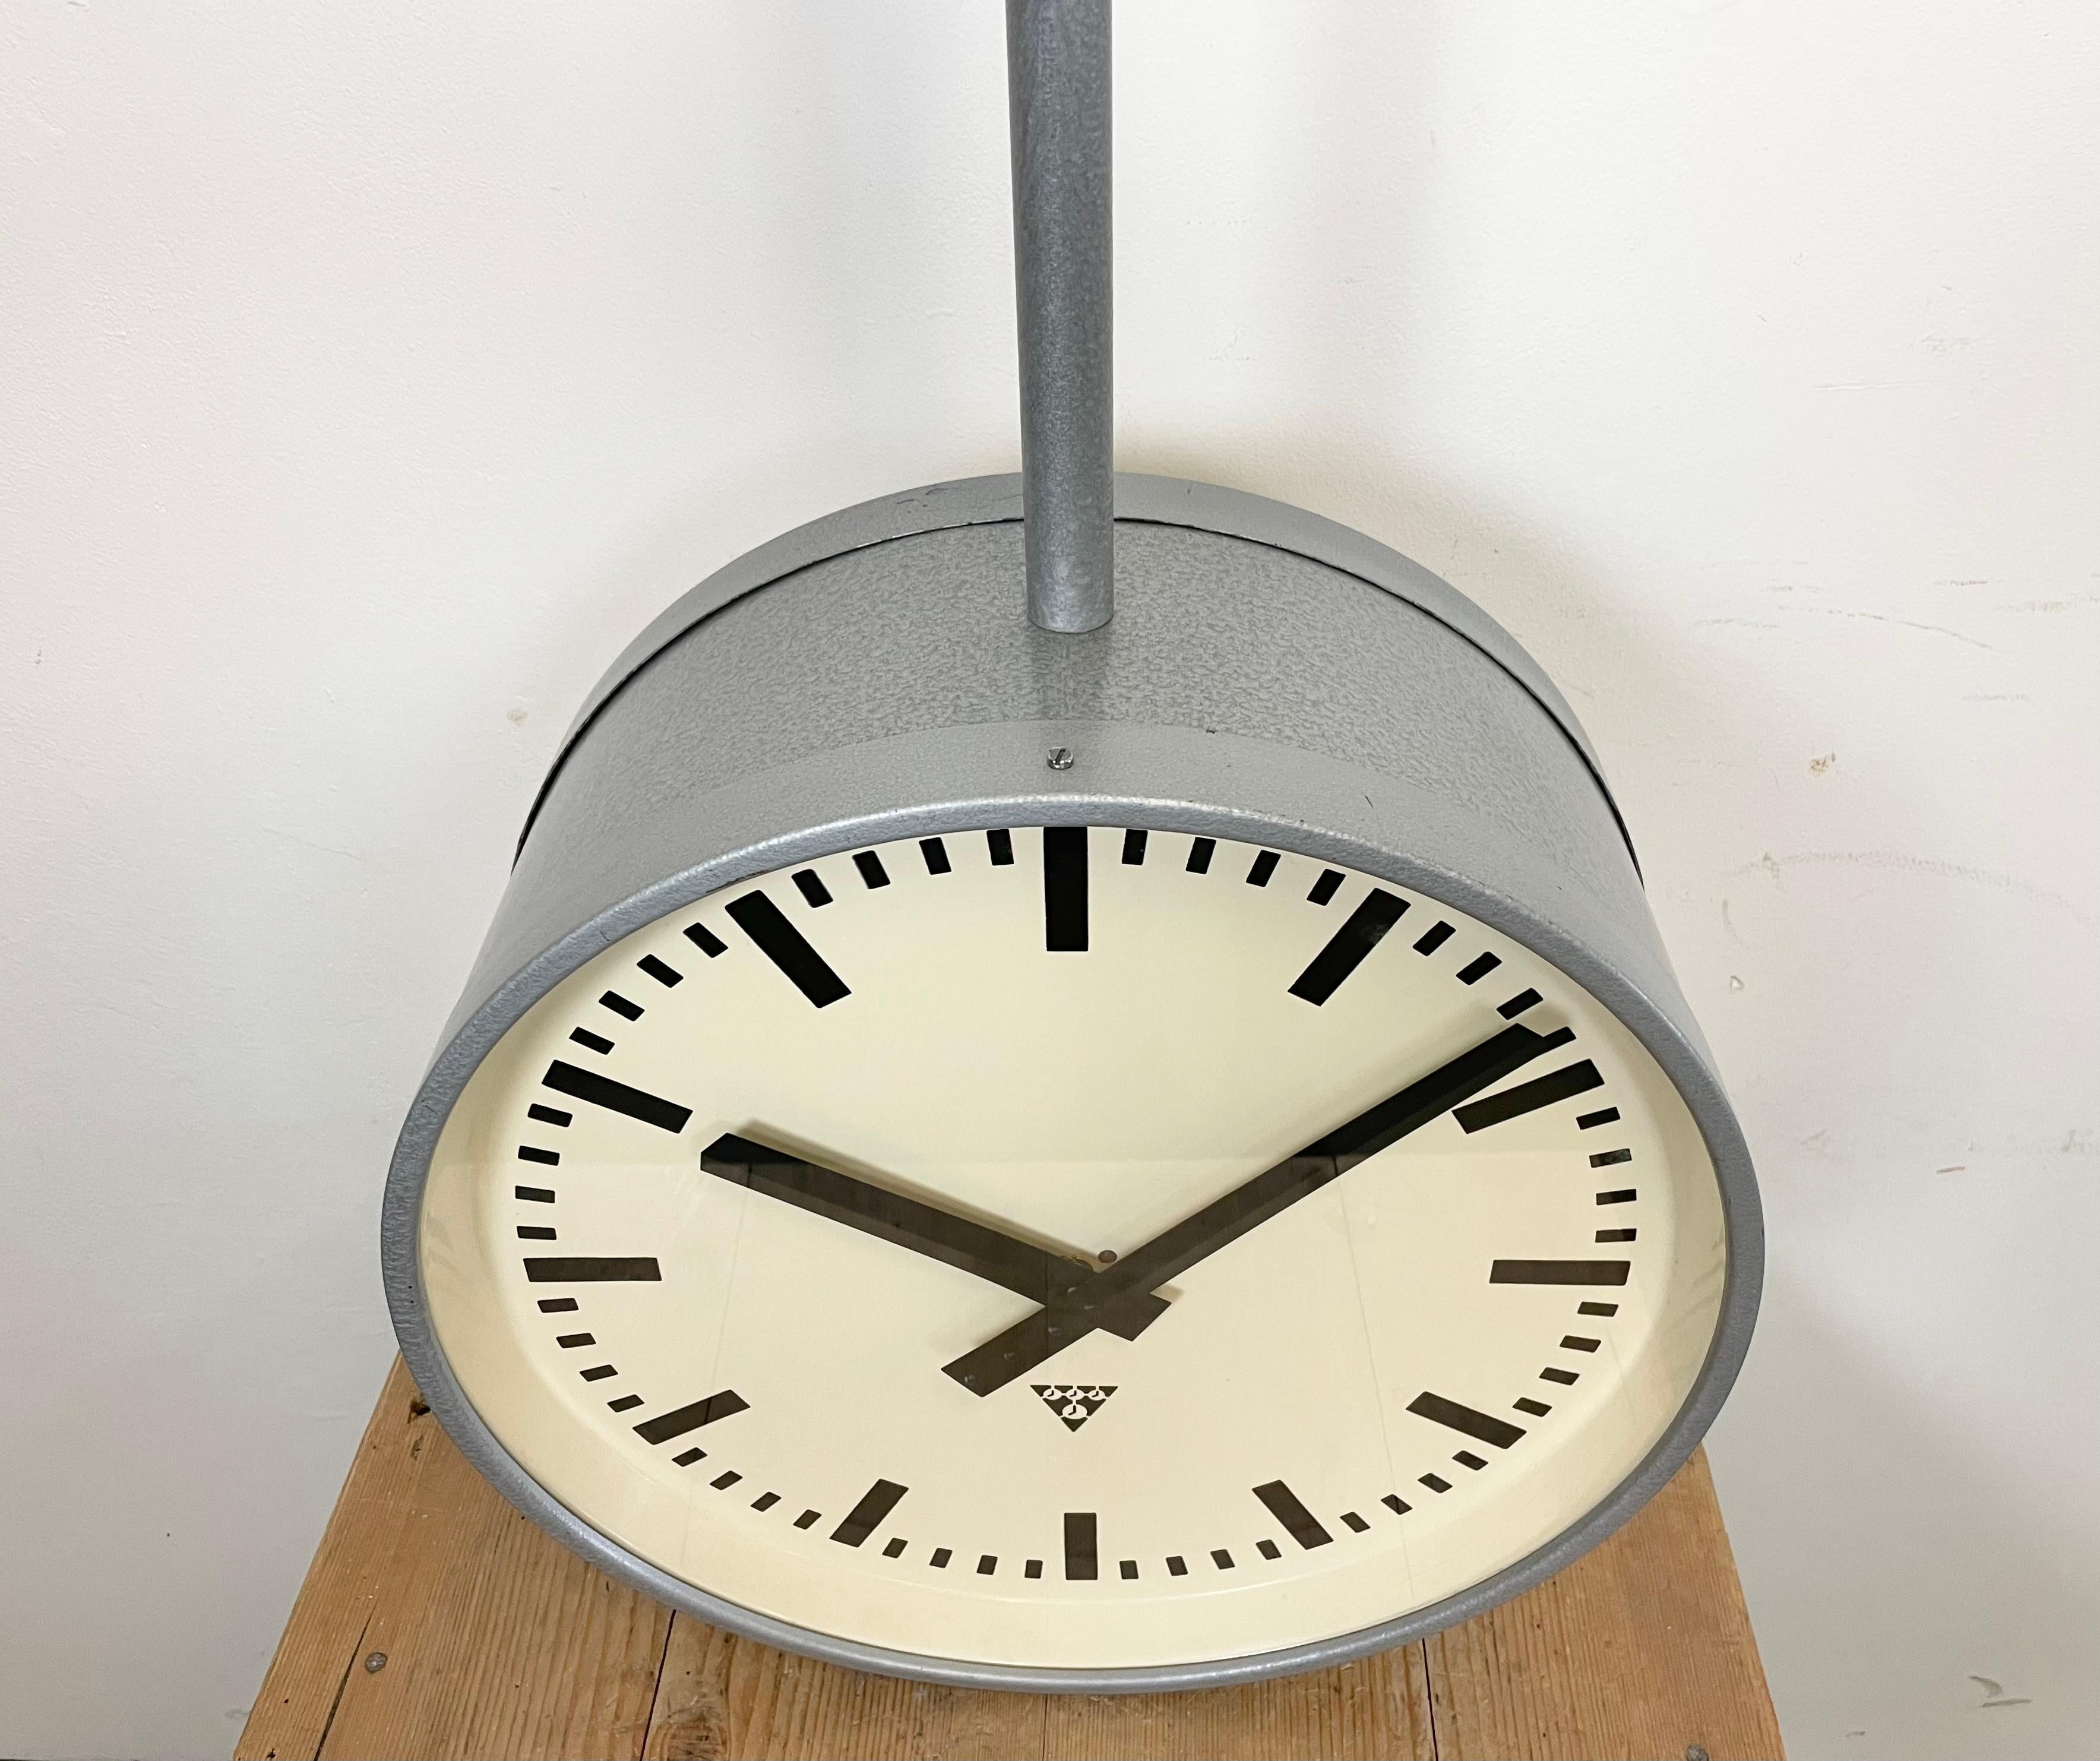 Czech Large Industrial Double Sided Railway or Factory Clock from Pragotron, 1960s